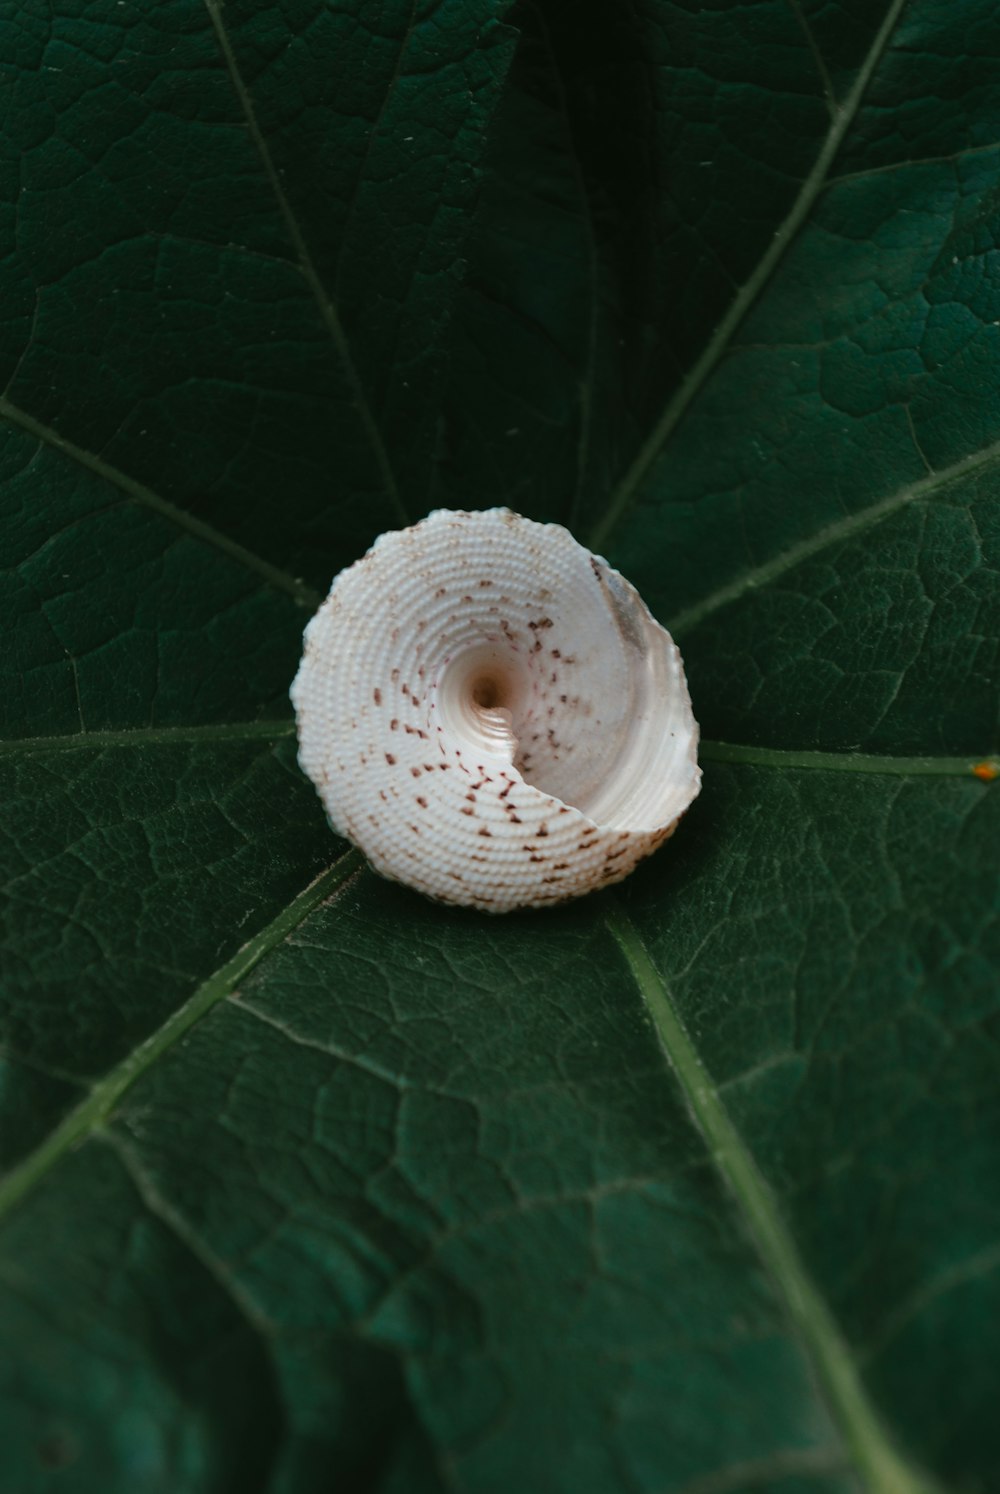 a close up of a white object on a green leaf